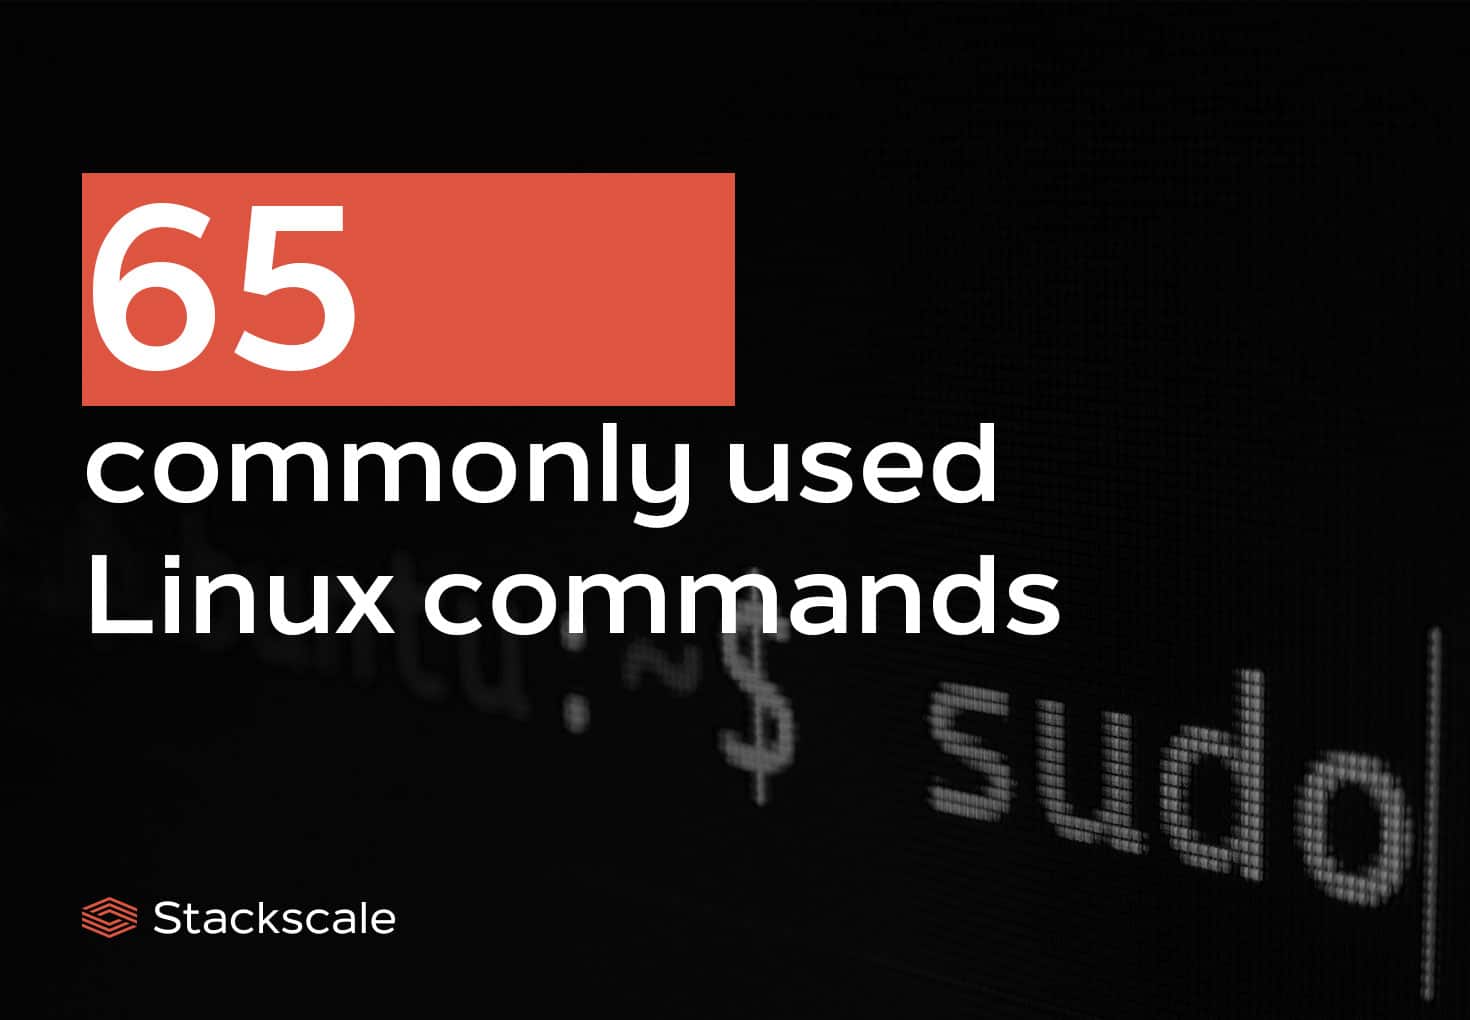 Commonly used Linux commands